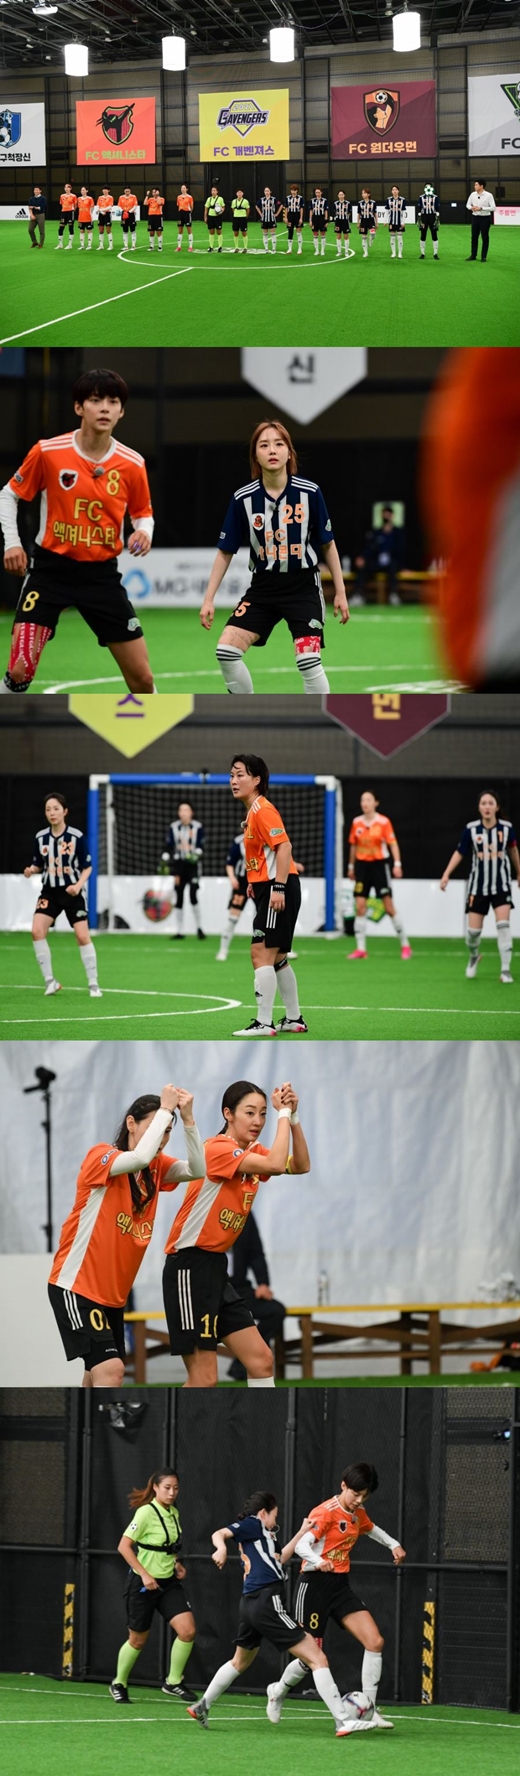 In SBS Goal Hits (hereinafter referred to as Goal Women), the match between FC Actianista and FC Anaconda will be held.Goalla recorded 2049 TV viewer ratings of 5.5% with the big match of FC Gucheok Jangsin and FC Gavengers, the strongest team in the league last week, and renewed its own top TV viewer ratings.In this broadcast, expectations are gathered with FC Actionista, which won the championship with an overwhelming score of 4:0 from Kyonggi last time, and Kyonggi of FC Anaconda, which showed great growth.FC Actianista is a team that proves its ability by building points at the same time as the league starts.In particular, it showed a strong pressure on the dark horse FC Gavengers, and defeated FC Wonder Woman without a goal.This can be seen as a result of overcoming the pain of 0 wins in the previous season and showing efforts not to give up until the end.In particular, the performance of Hyecom Jeong He-In is taking a great part in threatening the top spot with a terrible momentum.Her kick, which was born as Ace in the real world, is being checked by all teams.It is no exaggeration to say that her defense, which is not afraid of the ball, is the first factor in the victory.On the other hand, the transformation of FC Anaconda, which shows a terrible growth rate, is also noteworthy.All members, including Ace Yoon Tae-jin, are upgrading their abilities, as well as showing the power of the Red Army with confidence that they do not back down.Attention is focusing on whether FC Actionista will win and solidify its momentum, take a step closer to the Super League, or beat everyones expectations and win the first victory and write a drama of reversal.Golden Woman is broadcasted at 10:30 pm on the 9th night later than usual due to the relay of the Beijing Olympics.